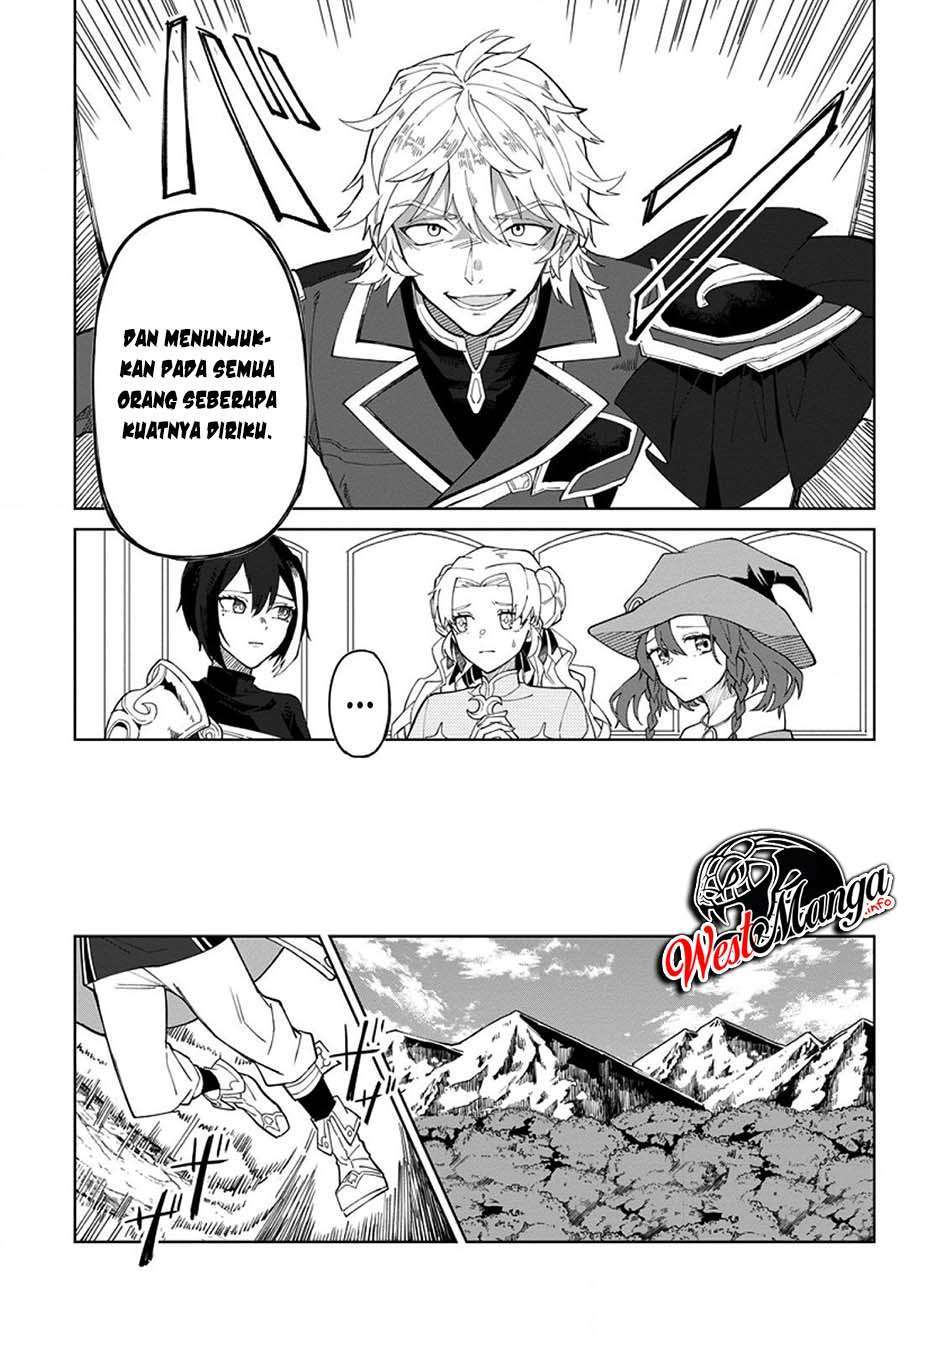 The White Mage Who Was Banished From the Hero’s Party Is Picked up by an S Rank Adventurer ~ This White Mage Is Too Out of the Ordinary! Chapter 5